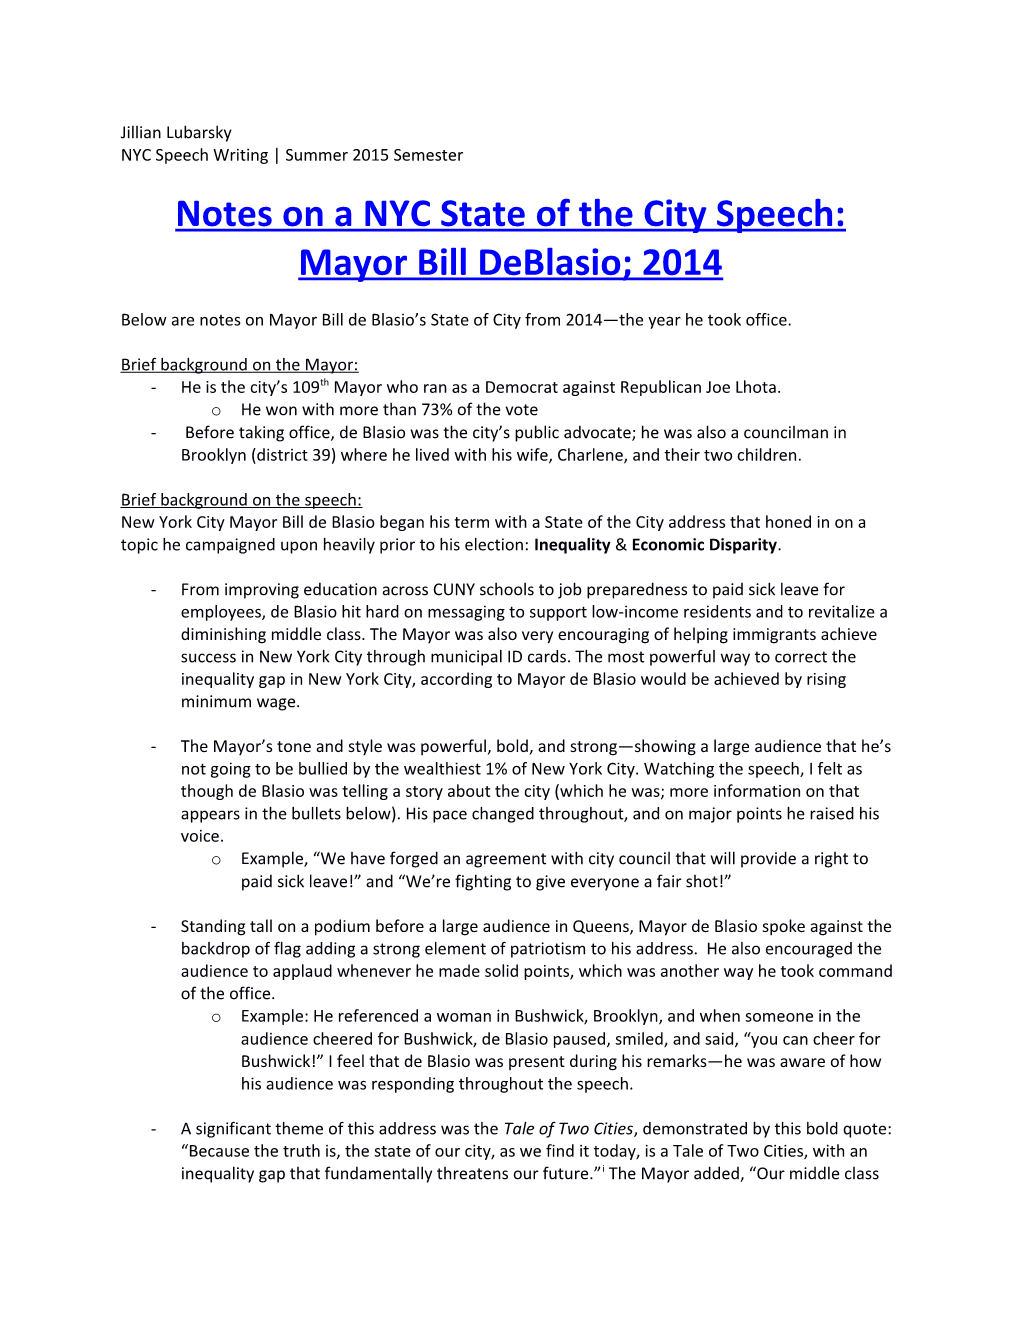 Notes on a NYC State of the City Speech: Mayor Bill Deblasio; 2014